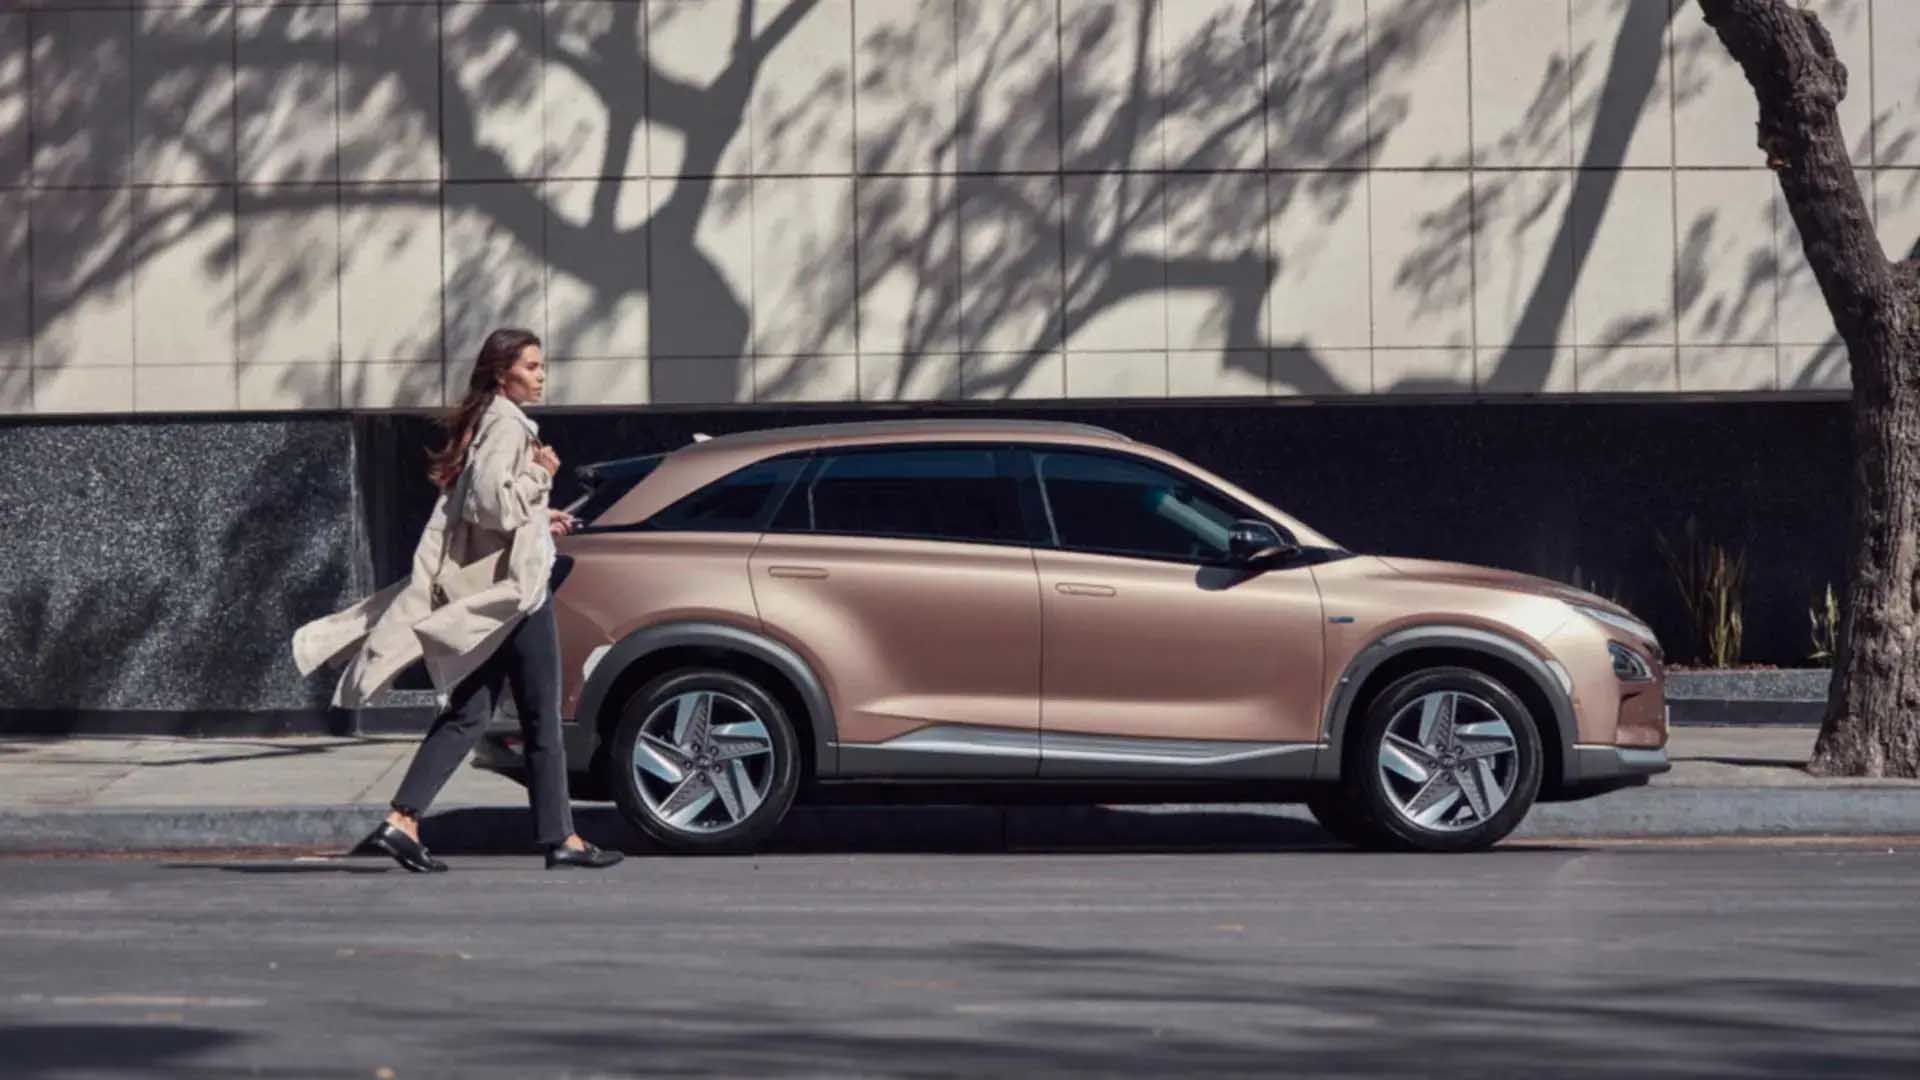 A woman standing next to a Hyundai NEXO hydrogen fuel cell vehicle in an urban environment.